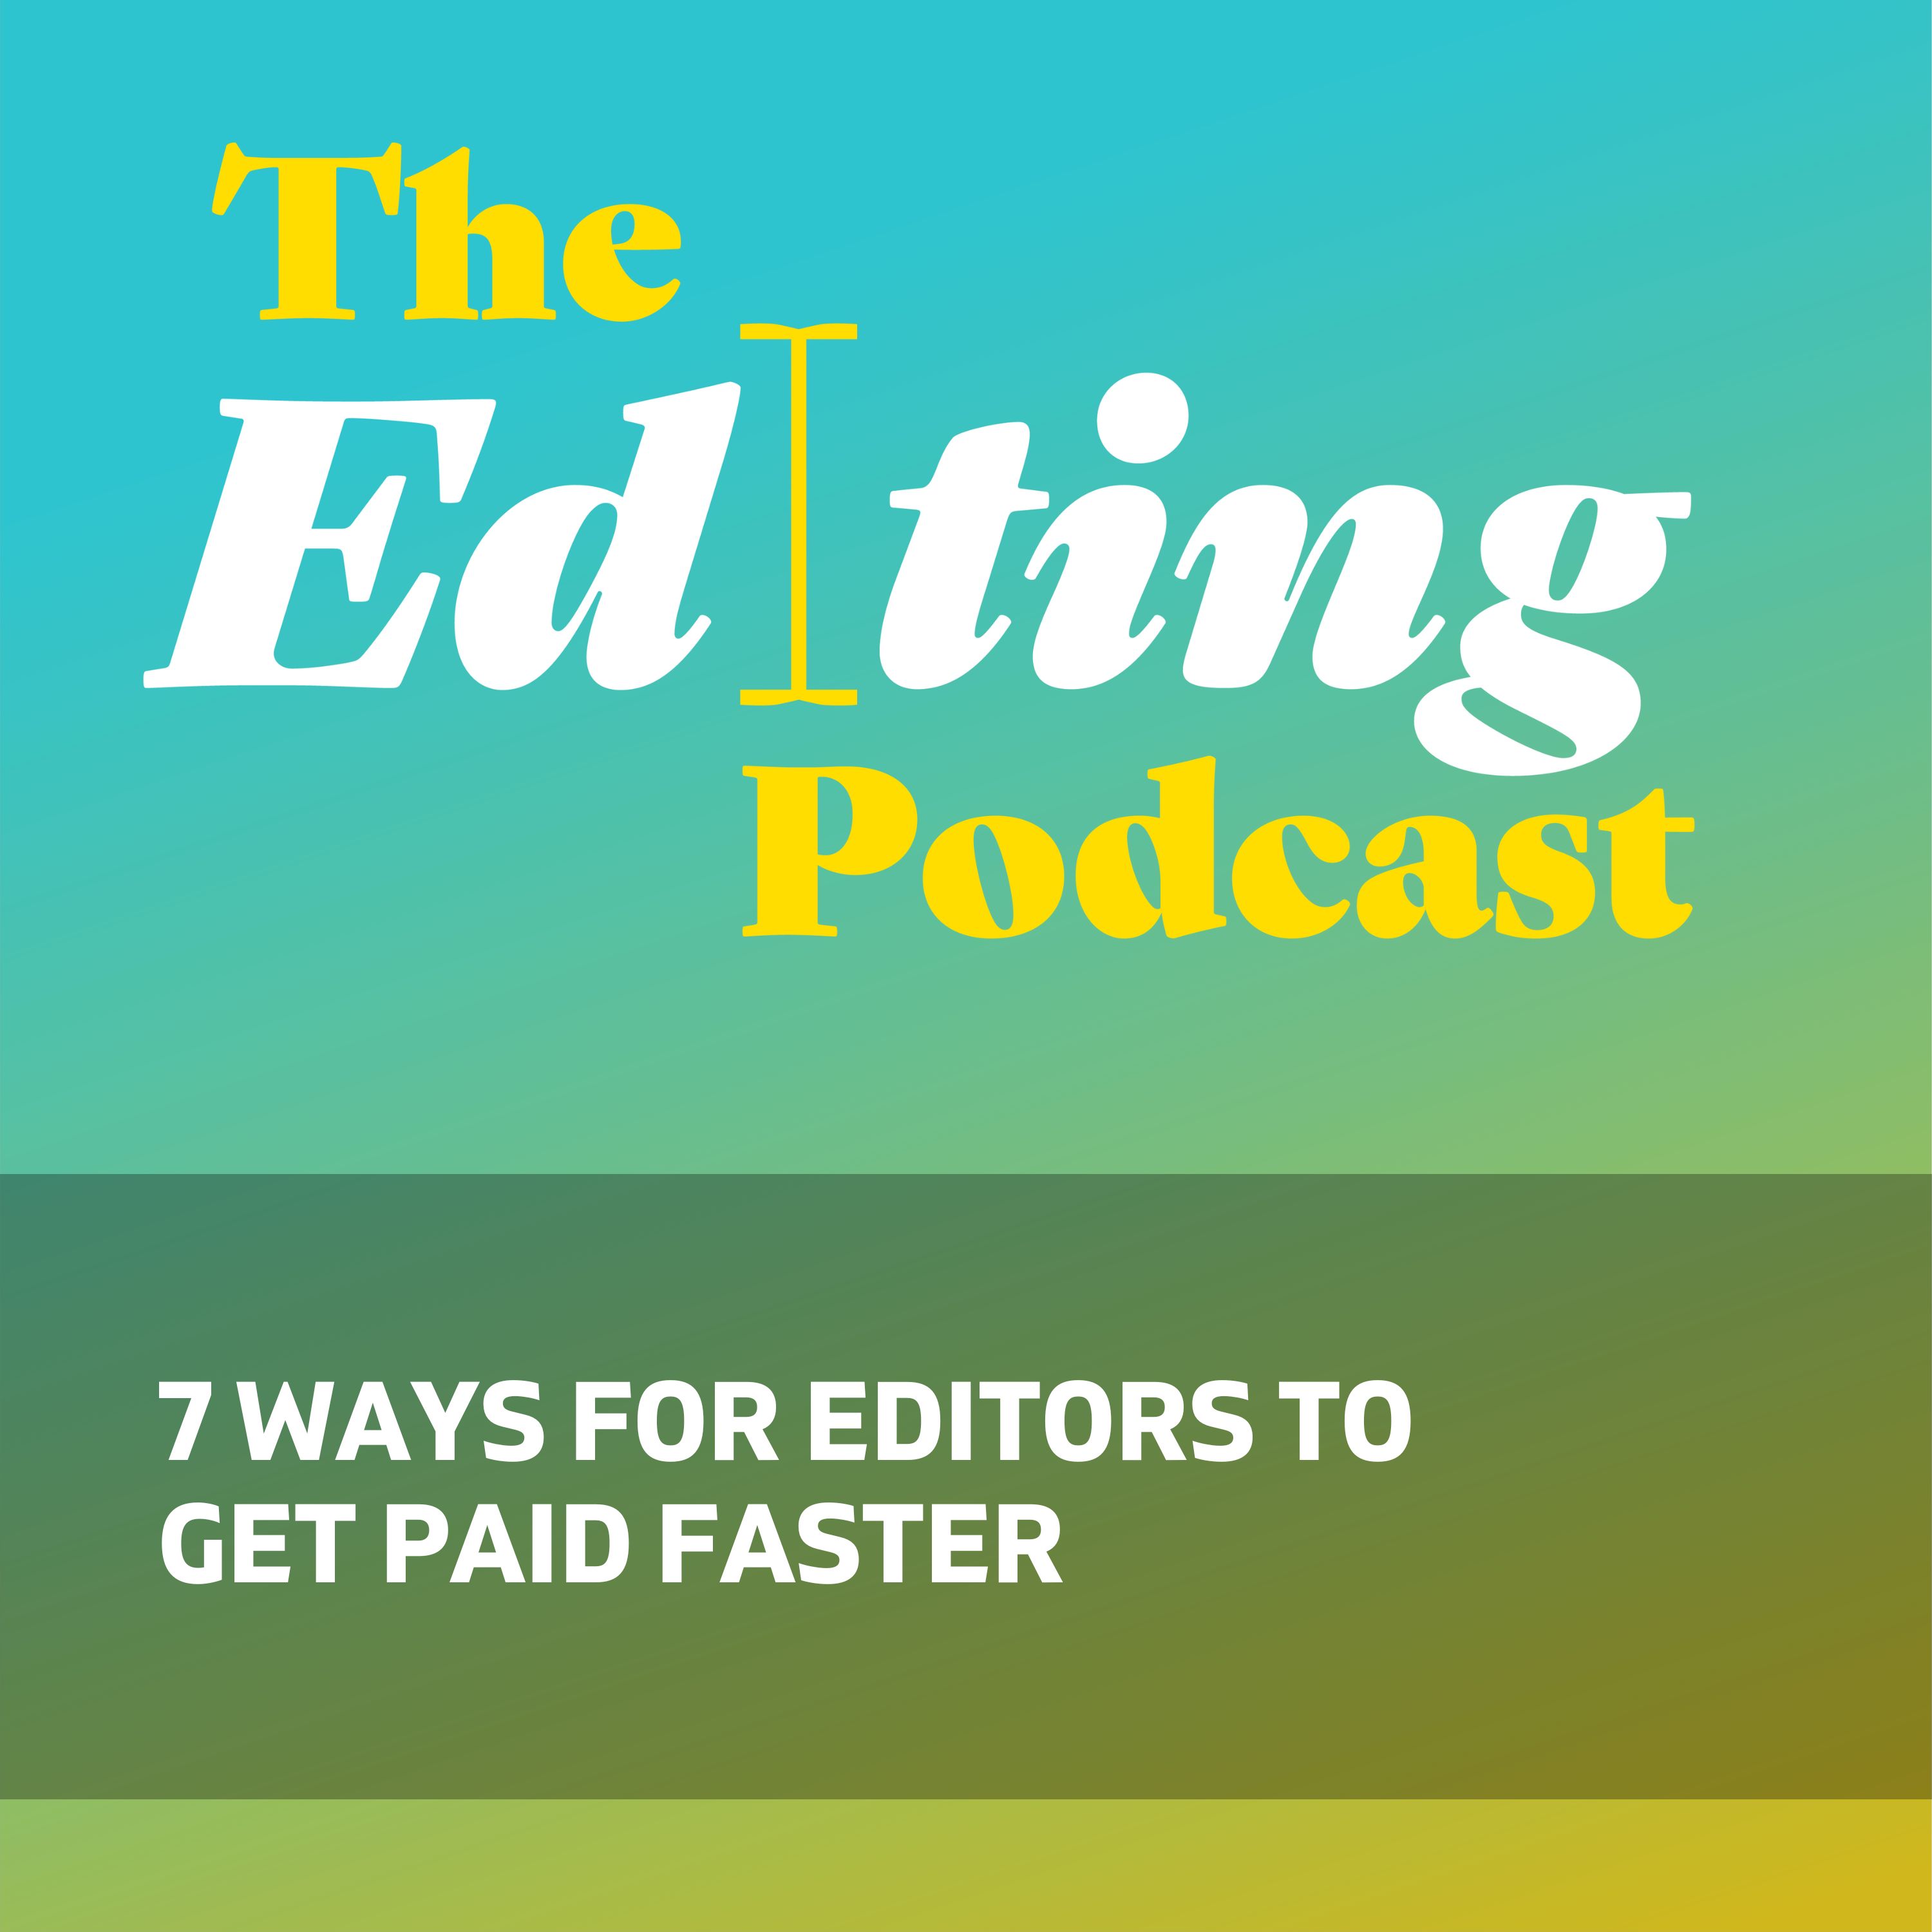 7 ways for editors to get paid faster